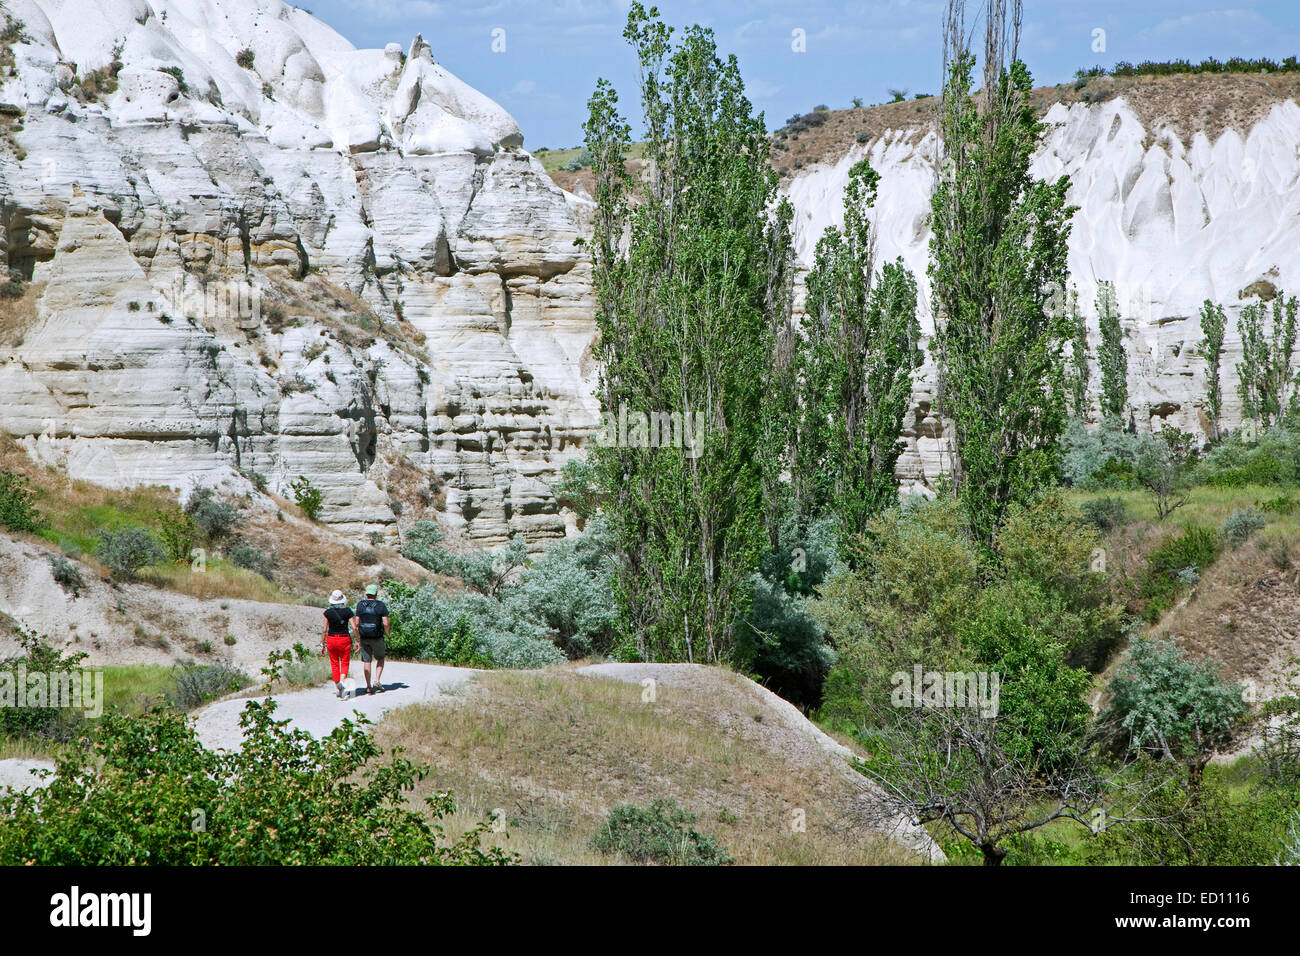 Tourists walking among eroded white sandstone rock formations at Cappadocia in Central Anatolia, Turkey Stock Photo